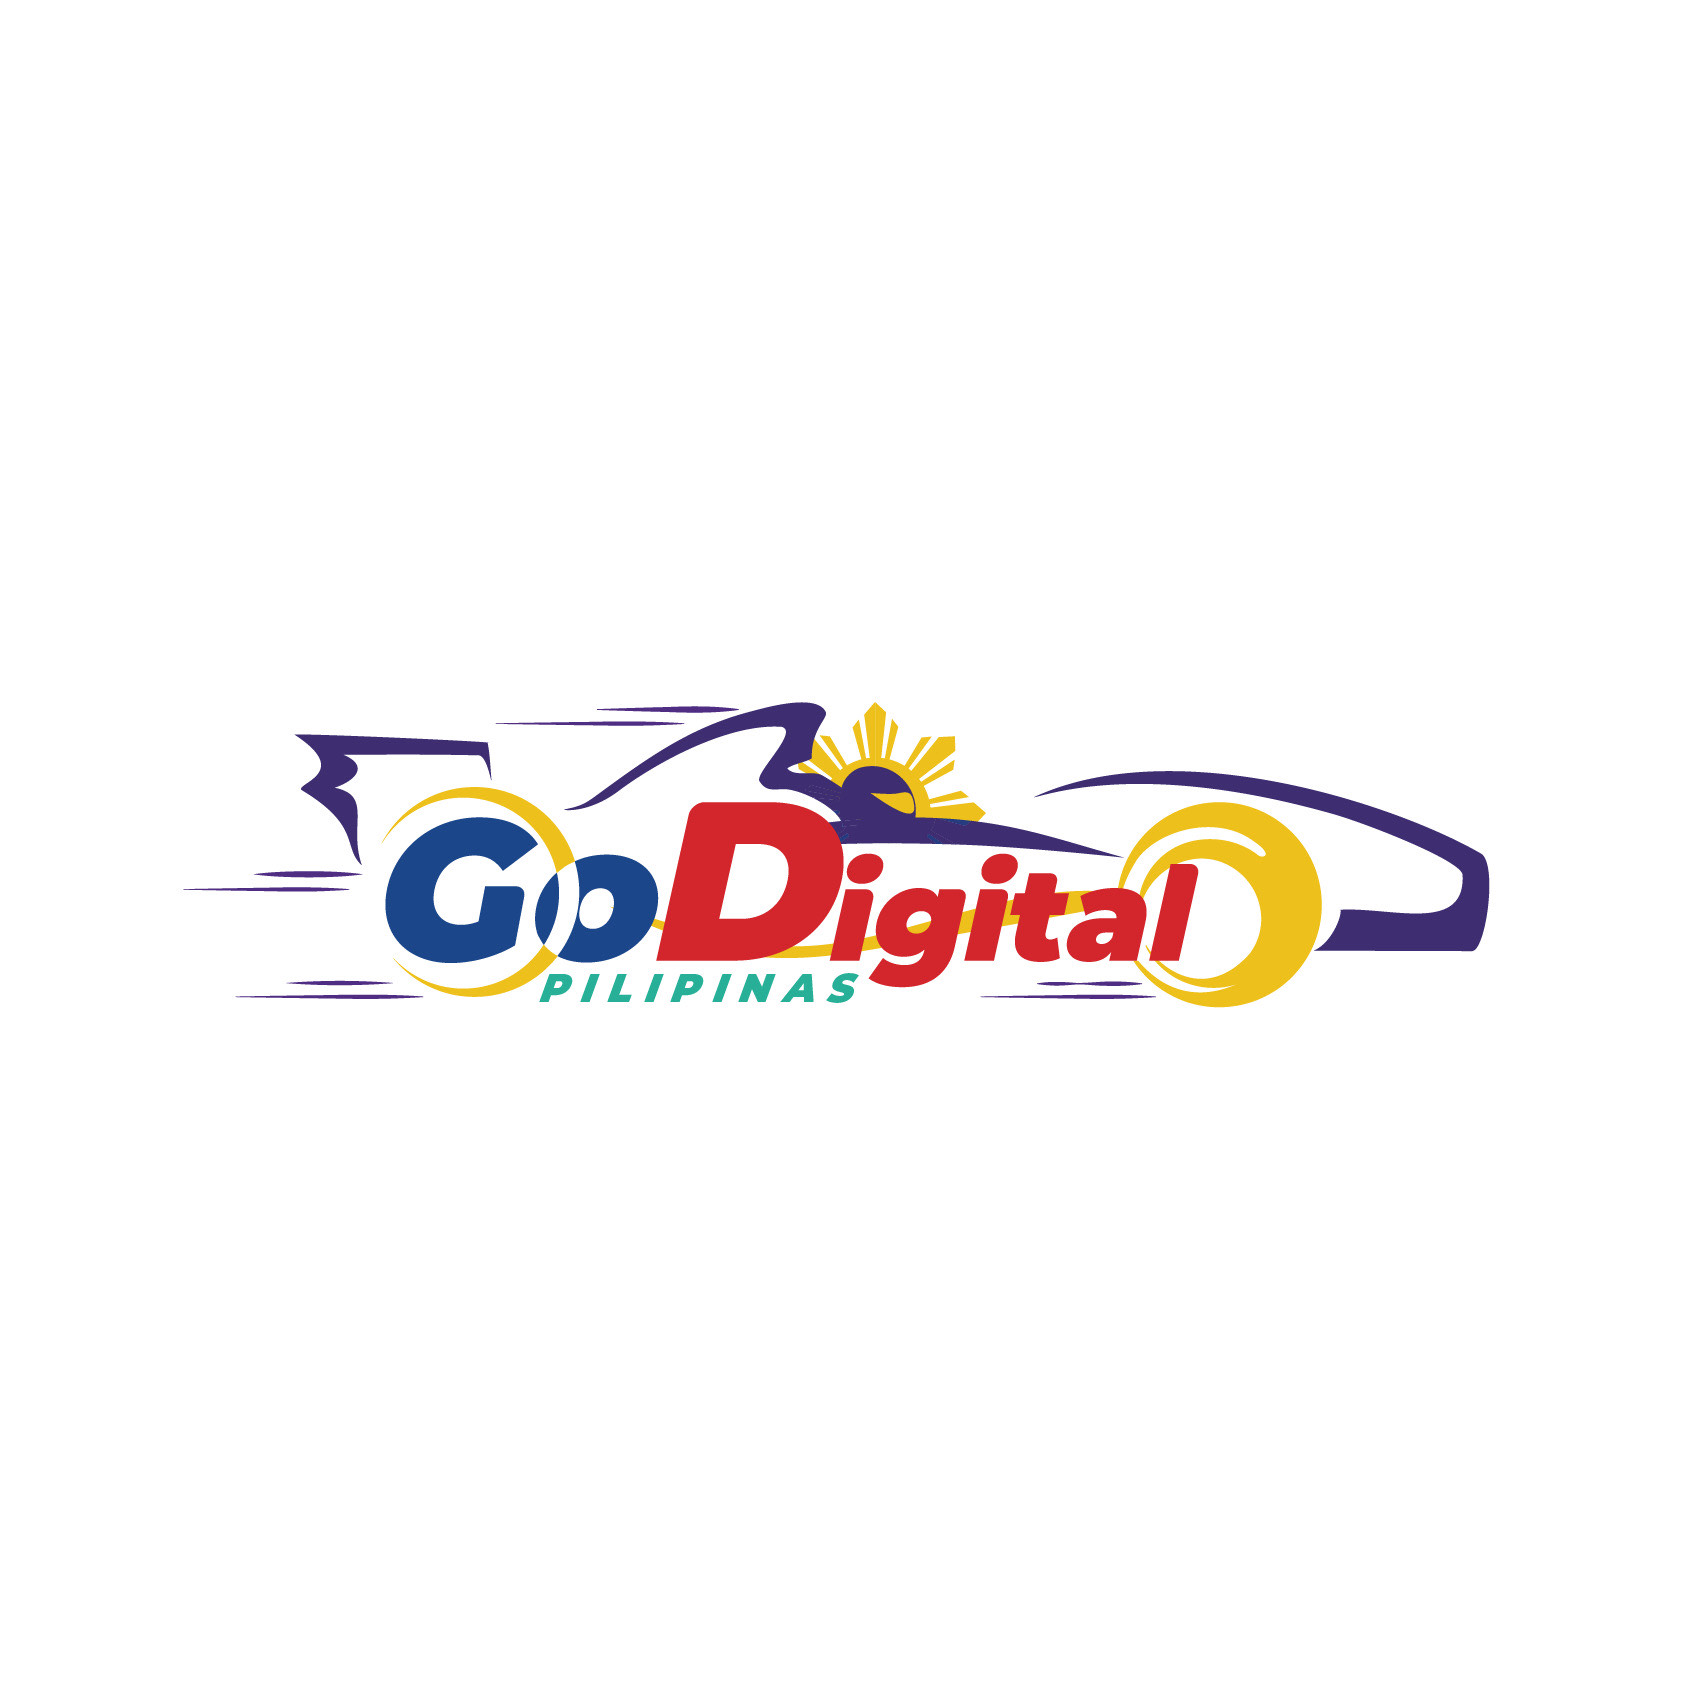 GDP Appoints New Executive Director to Help Boost Digital Services for Filipinos